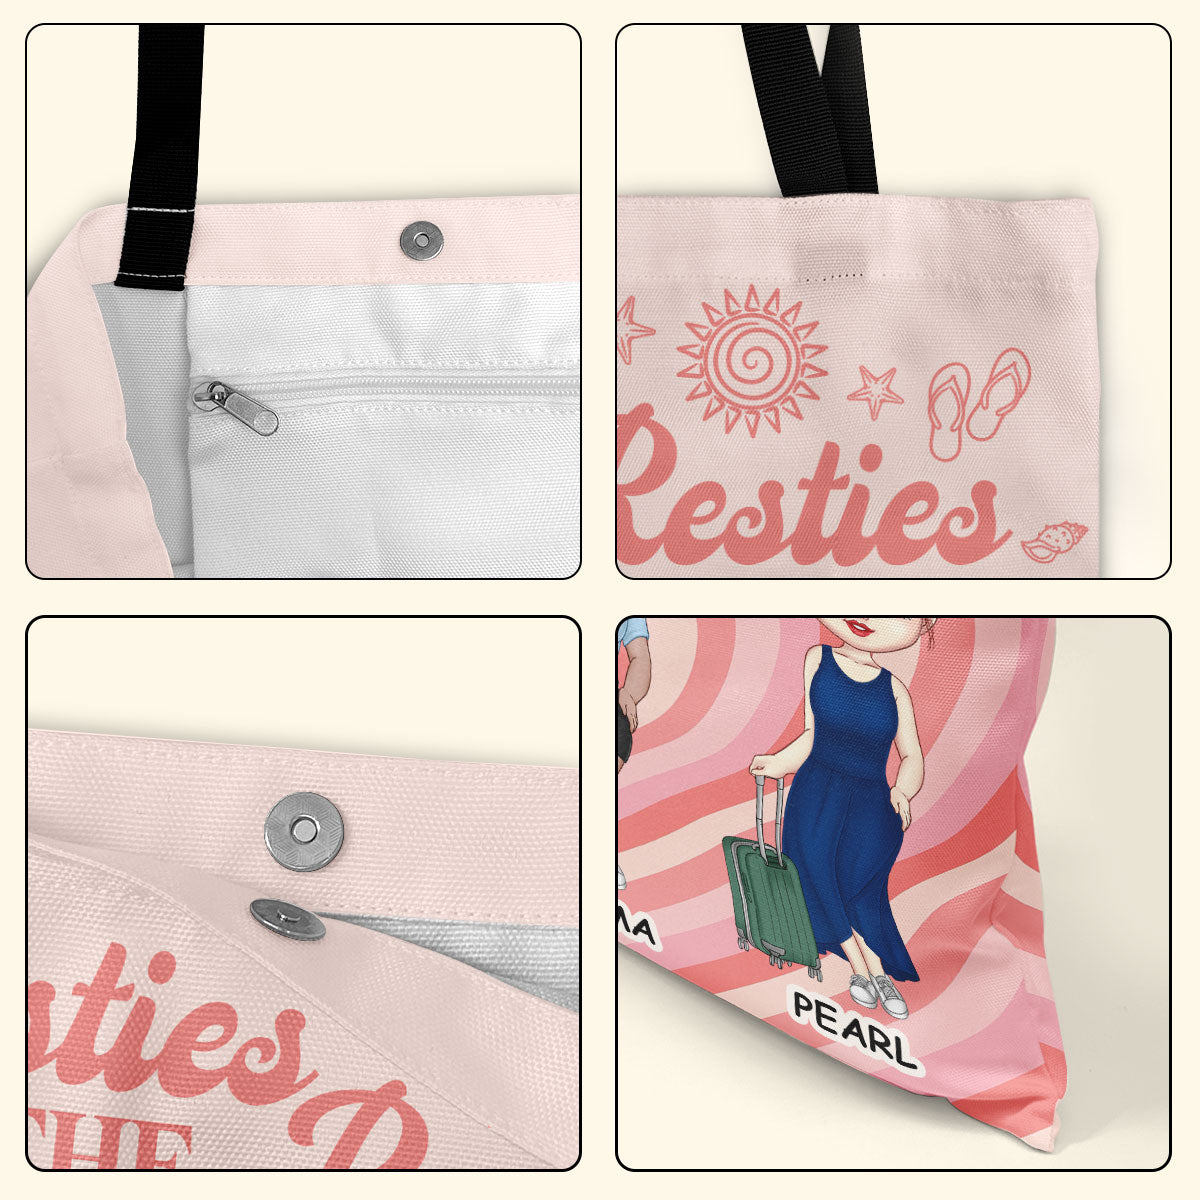 Besties For The Resties  - Personalized Tote Bag TCTBN66